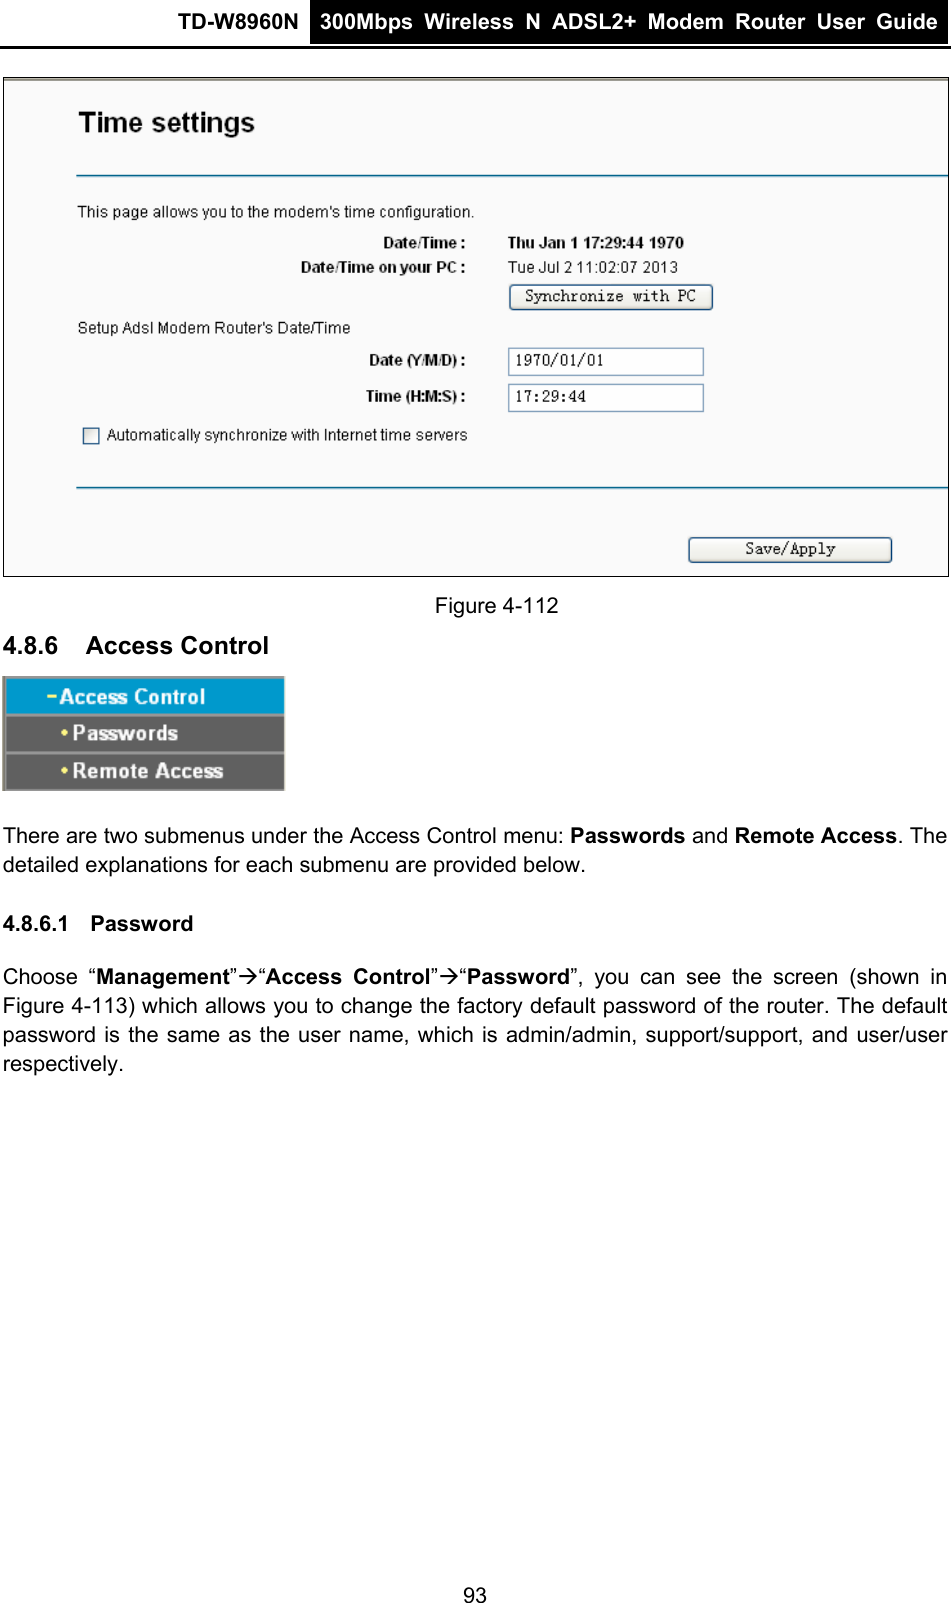 TD-W8960N  300Mbps Wireless N ADSL2+ Modem Router User Guide   Figure 4-112 4.8.6  Access Control  There are two submenus under the Access Control menu: Passwords and Remote Access. The detailed explanations for each submenu are provided below. 4.8.6.1  Password Choose “Management”“Access Control”“Password”, you can see the screen (shown in Figure 4-113) which allows you to change the factory default password of the router. The default password is the same as the user name, which is admin/admin, support/support, and user/user respectively. 93 